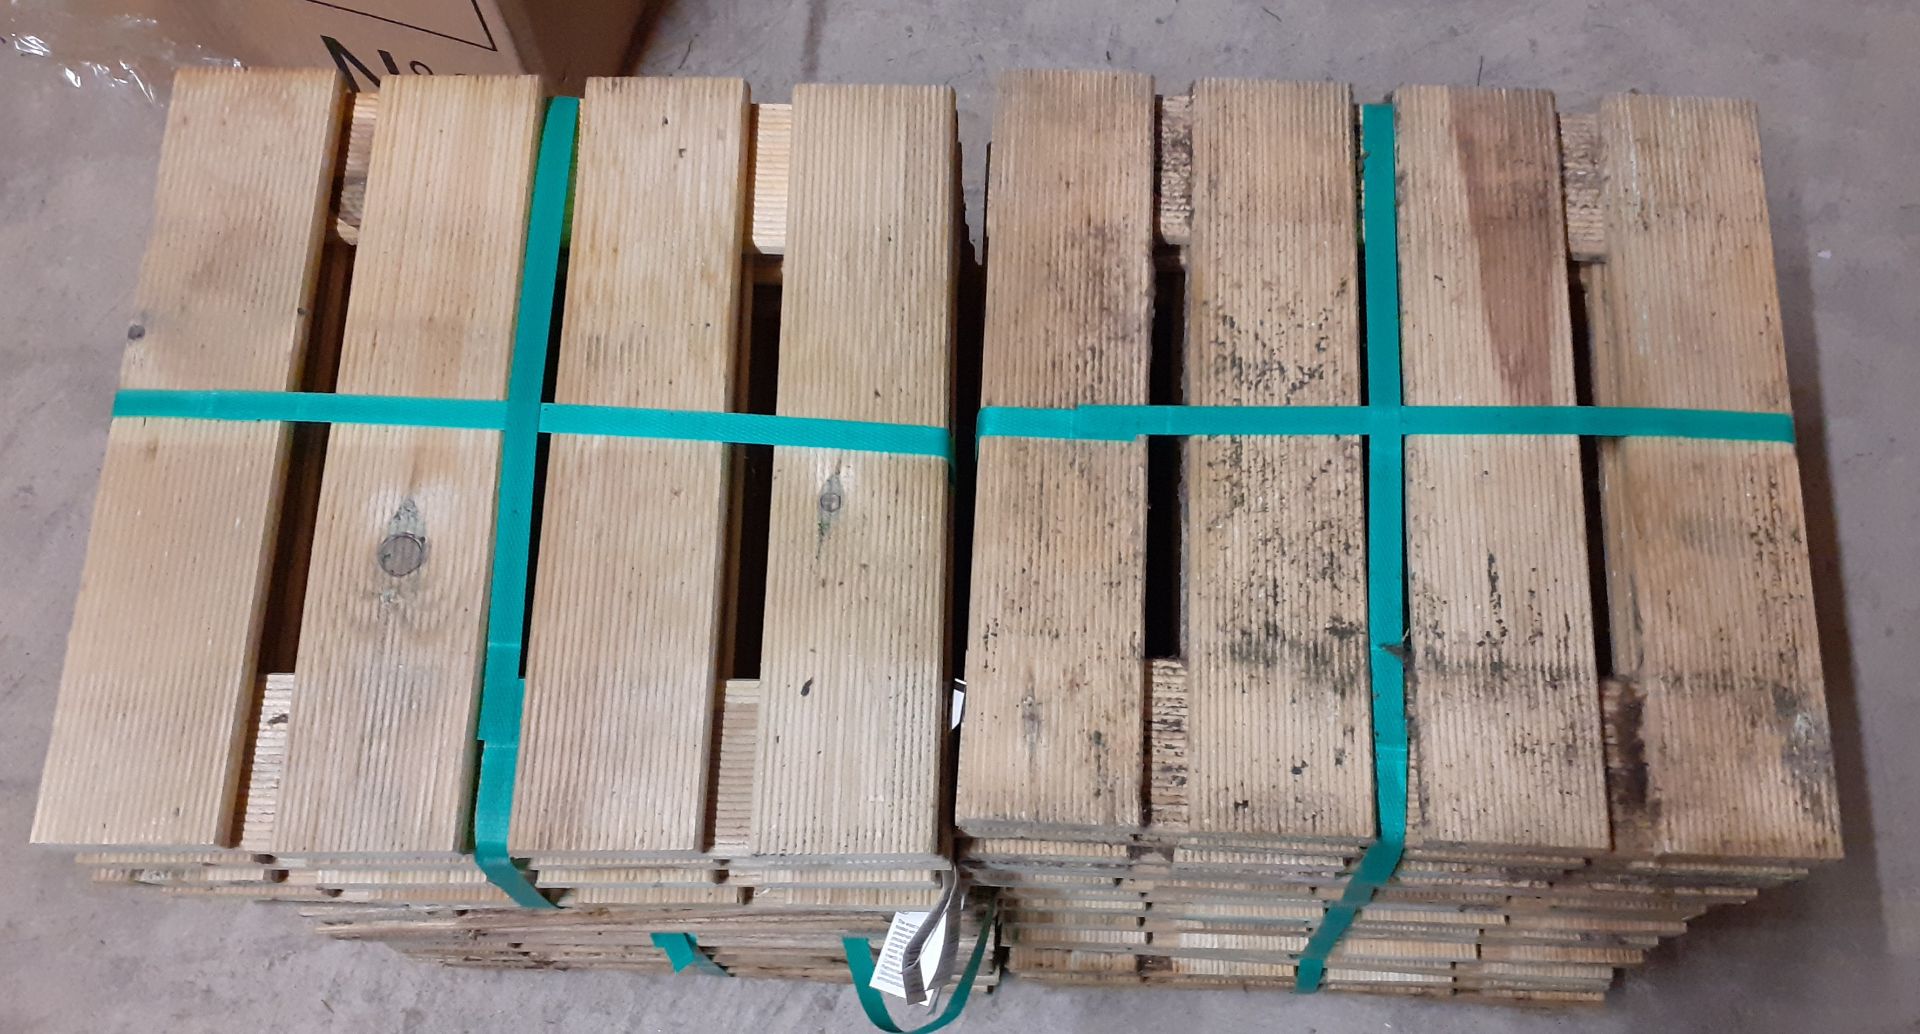 X 6 PACK OF 6 DECKING TILES. APROXIMATE SIZE H 2.4 X W 30 X 30 CM. TOTAL RRP £149.94